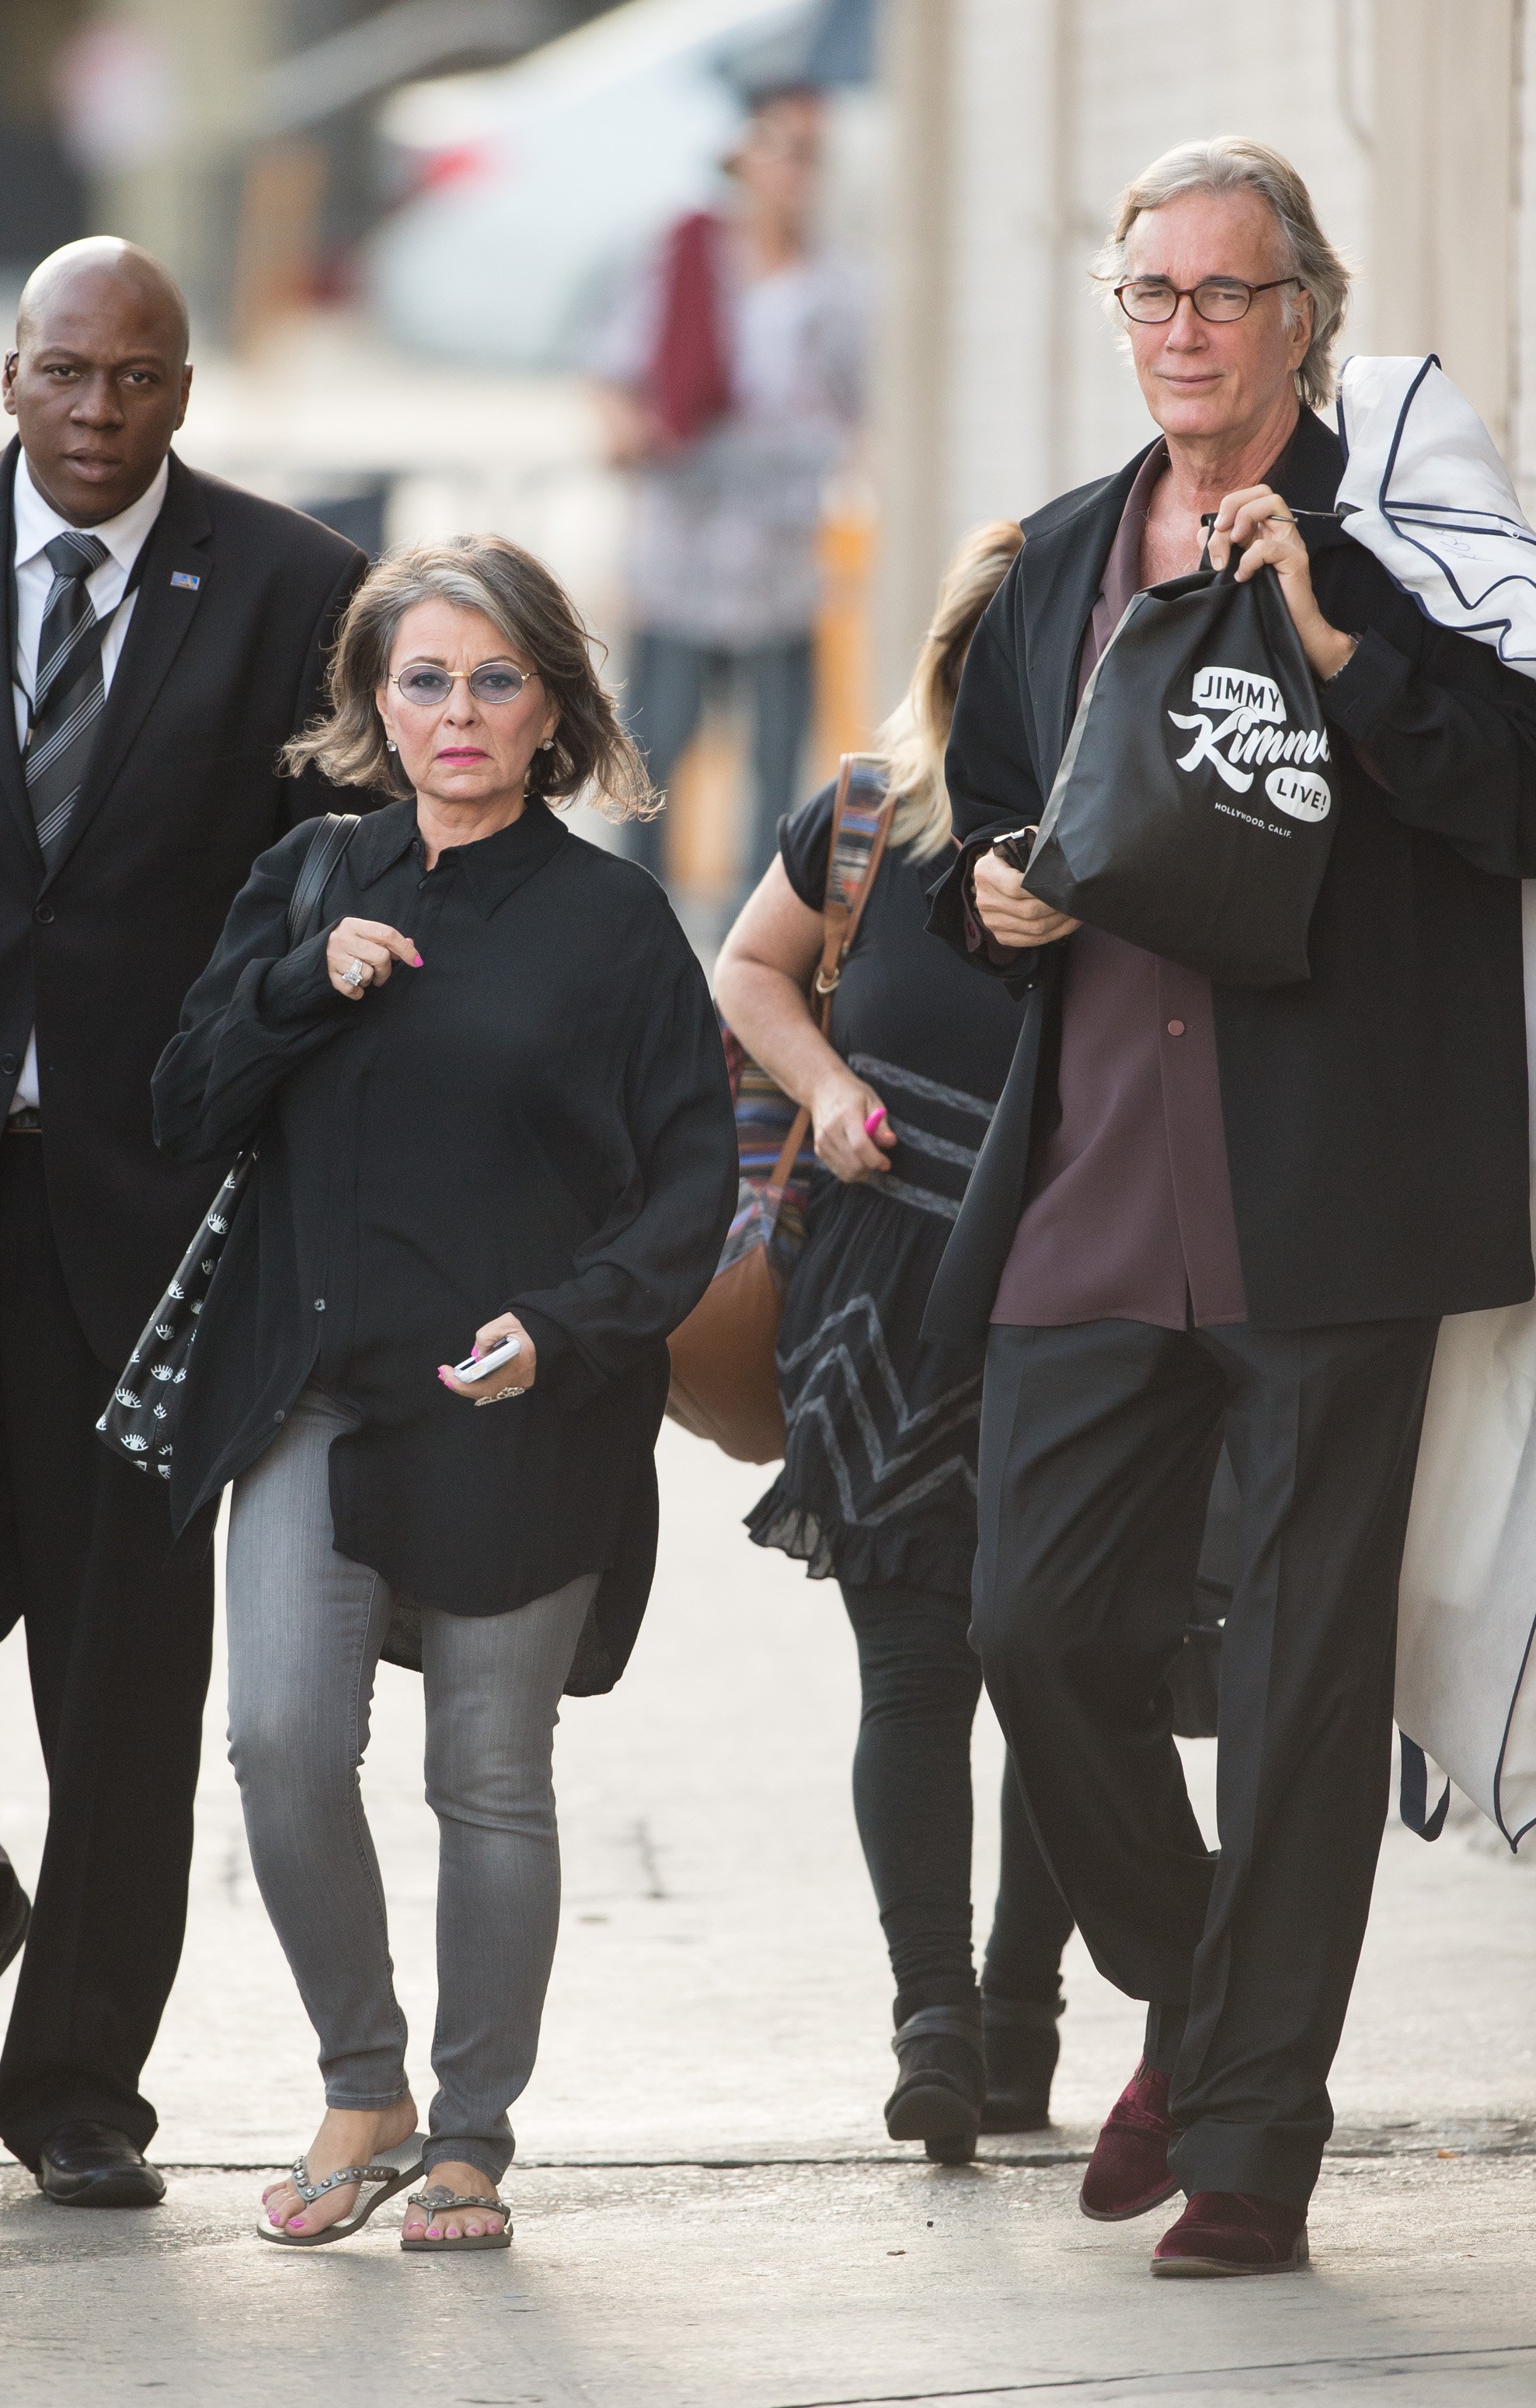 Roseanne Barr and Johnny Argent walking in Hollywood on June 24, 2014, in Los Angeles, California. | Source: Getty Images